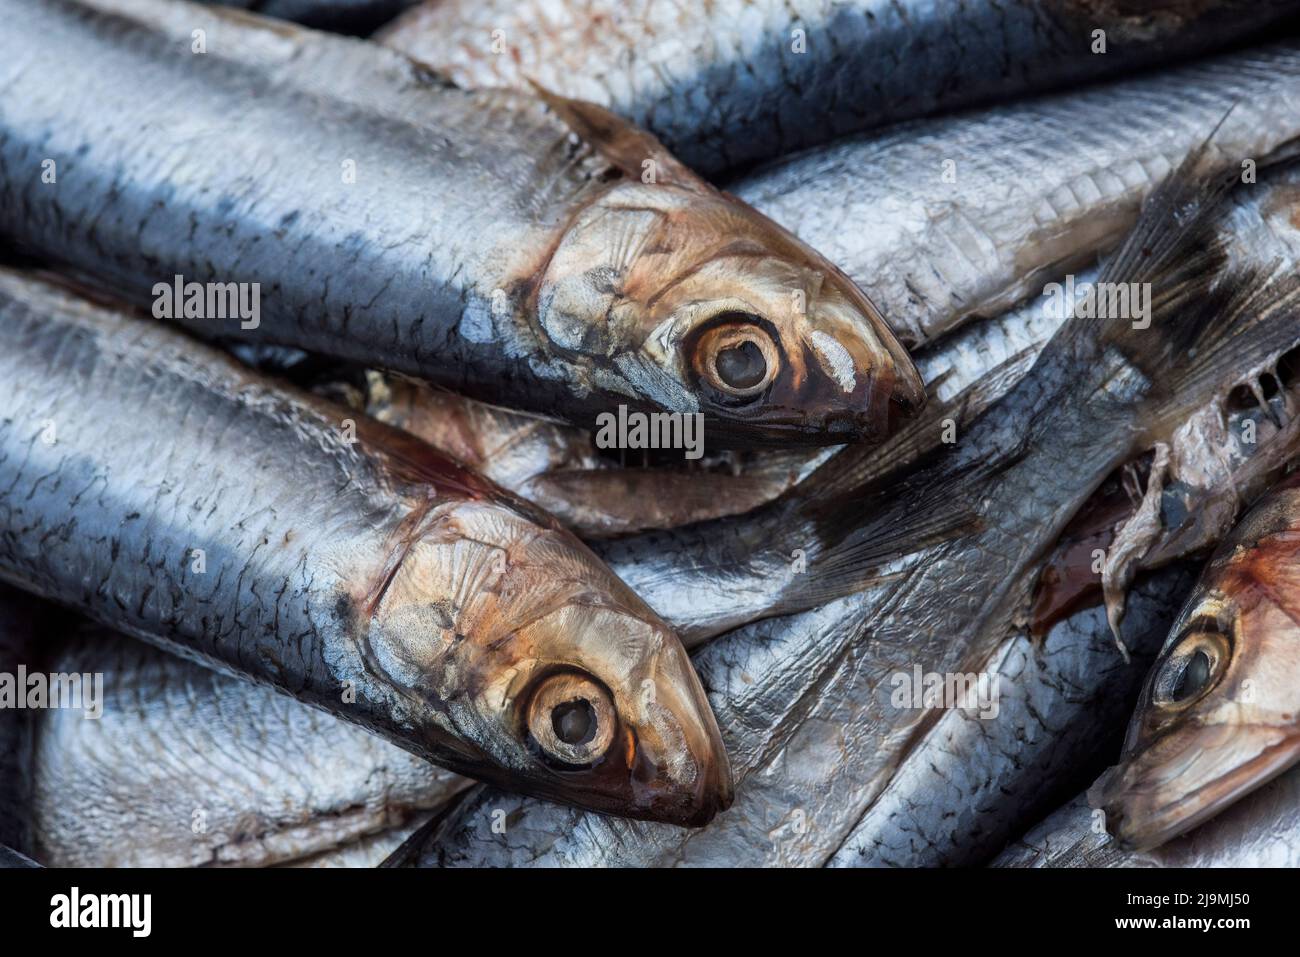 Sardines / pilchards - Sardina pilchardus. Home cooking / fishmongers. Over fishing. Fishery policy. Micro-plastic pollution of the oceans. Stock Photo